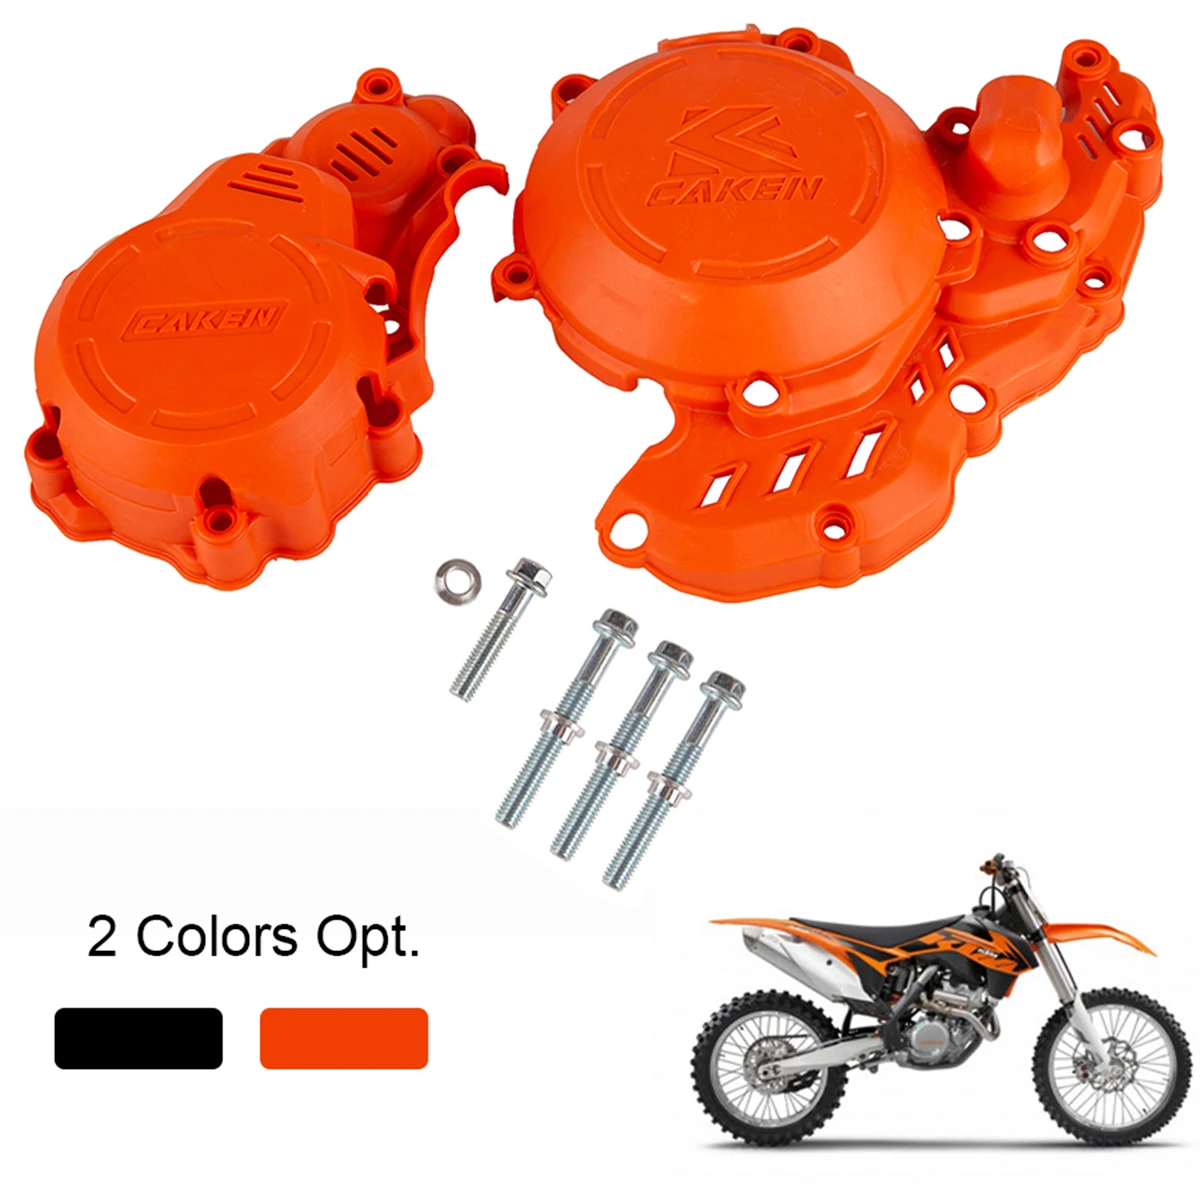 Motocross Ignition Clutch Cover Guard Protector For Husqvarna FE 250 FE 350 For KTM 250 300 EXCF XCFW 350 For GAS EC 250F 2021